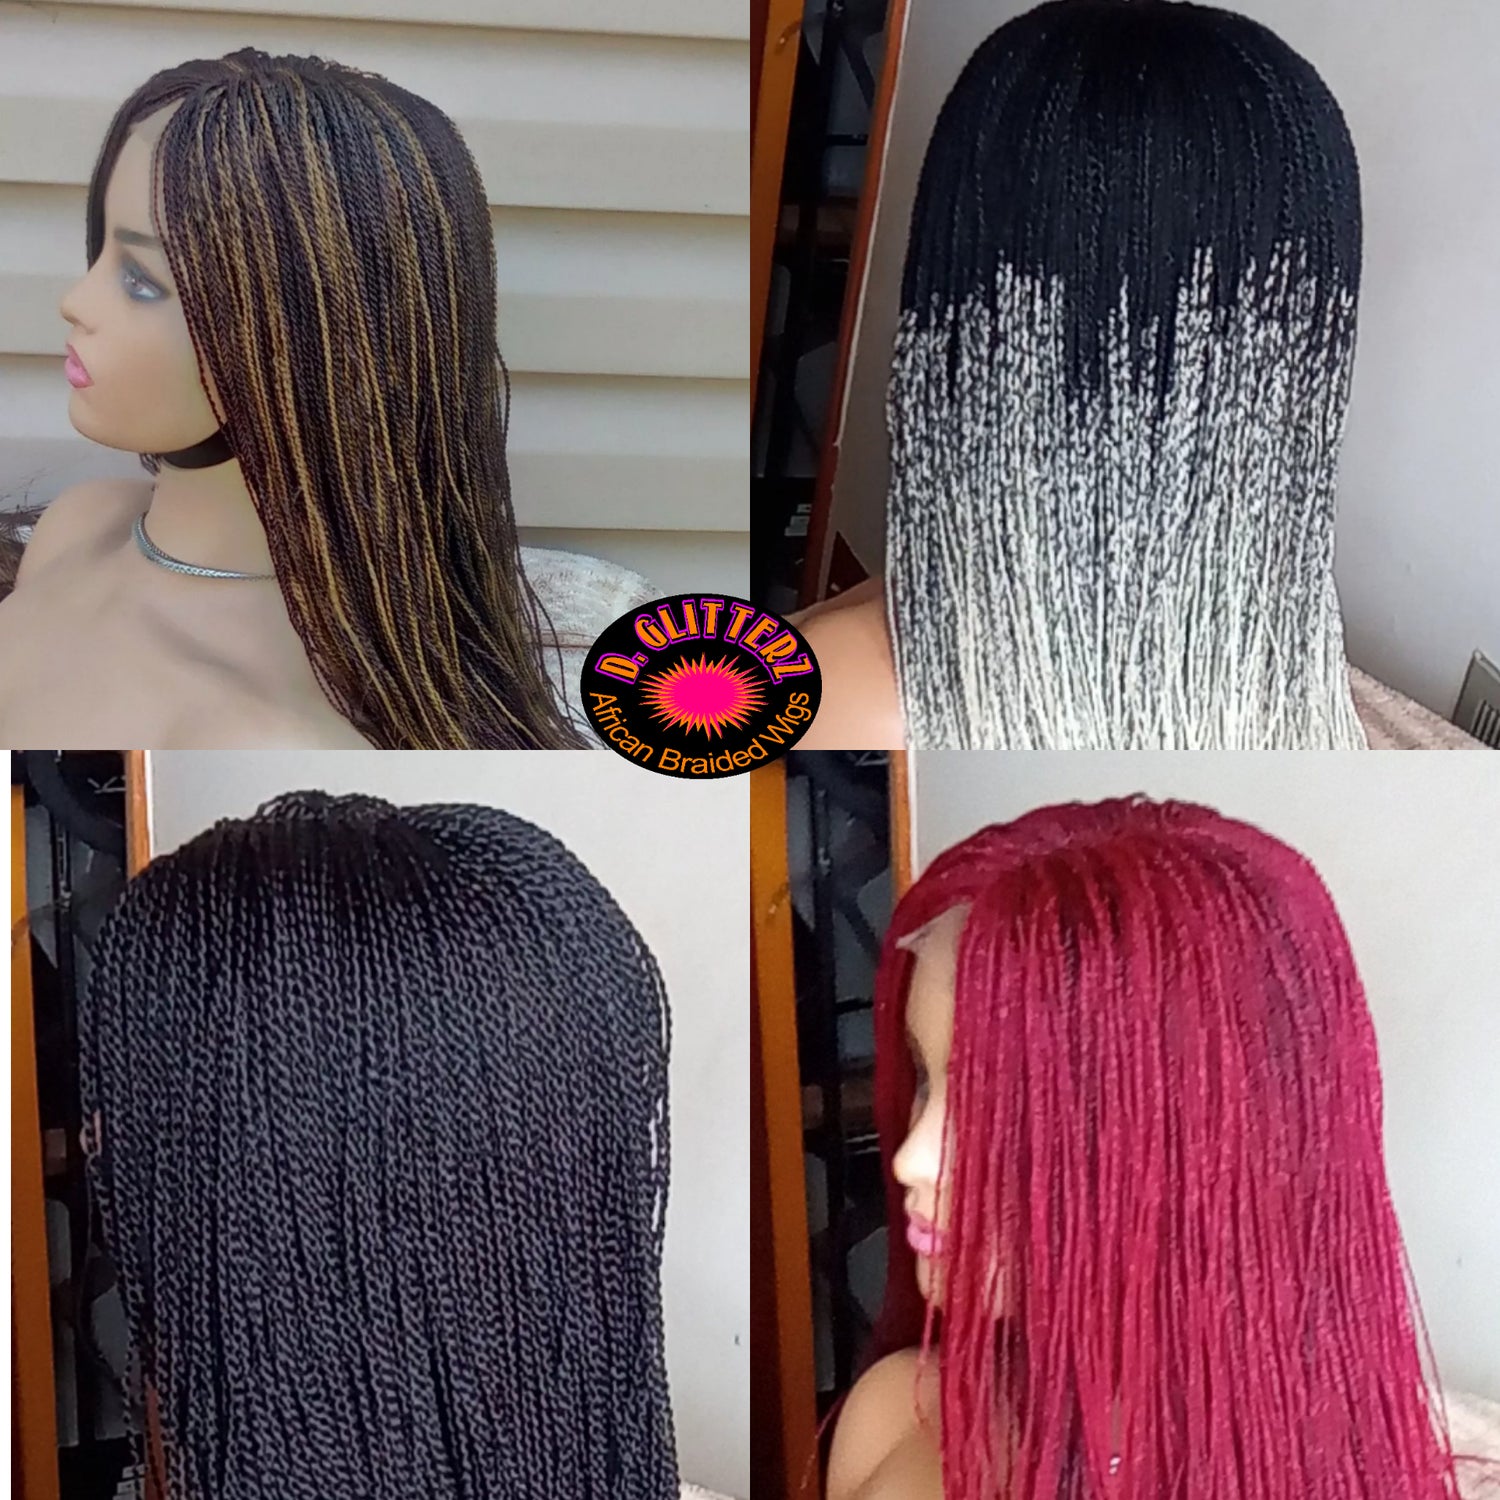 BRAIDED WIGS ON SALE